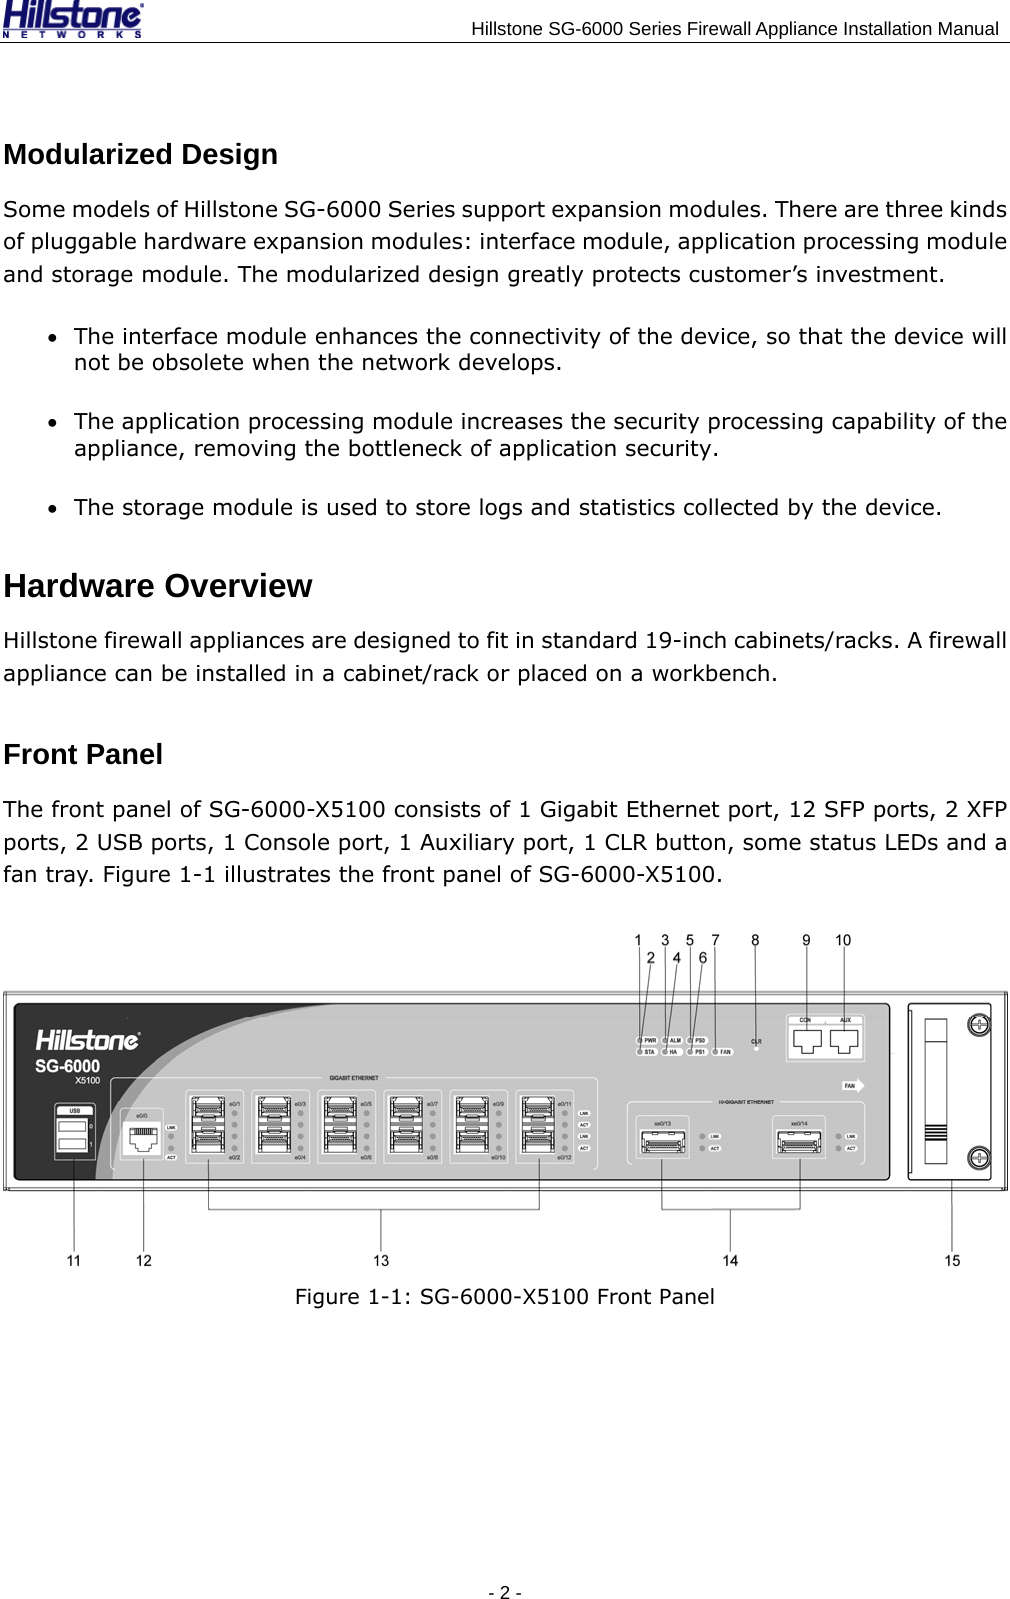                                    Hillstone SG-6000 Series Firewall Appliance Installation Manual Modularized Design Some models of Hillstone SG-6000 Series support expansion modules. There are three kinds of pluggable hardware expansion modules: interface module, application processing module and storage module. The modularized design greatly protects customer’s investment. • The interface module enhances the connectivity of the device, so that the device will not be obsolete when the network develops. • The application processing module increases the security processing capability of the appliance, removing the bottleneck of application security. • The storage module is used to store logs and statistics collected by the device. Hardware Overview Hillstone firewall appliances are designed to fit in standard 19-inch cabinets/racks. A firewall appliance can be installed in a cabinet/rack or placed on a workbench. Front Panel The front panel of SG-6000-X5100 consists of 1 Gigabit Ethernet port, 12 SFP ports, 2 XFP ports, 2 USB ports, 1 Console port, 1 Auxiliary port, 1 CLR button, some status LEDs and a fan tray. Figure 1-1 illustrates the front panel of SG-6000-X5100.  Figure 1-1: SG-6000-X5100 Front Panel - 2 -  